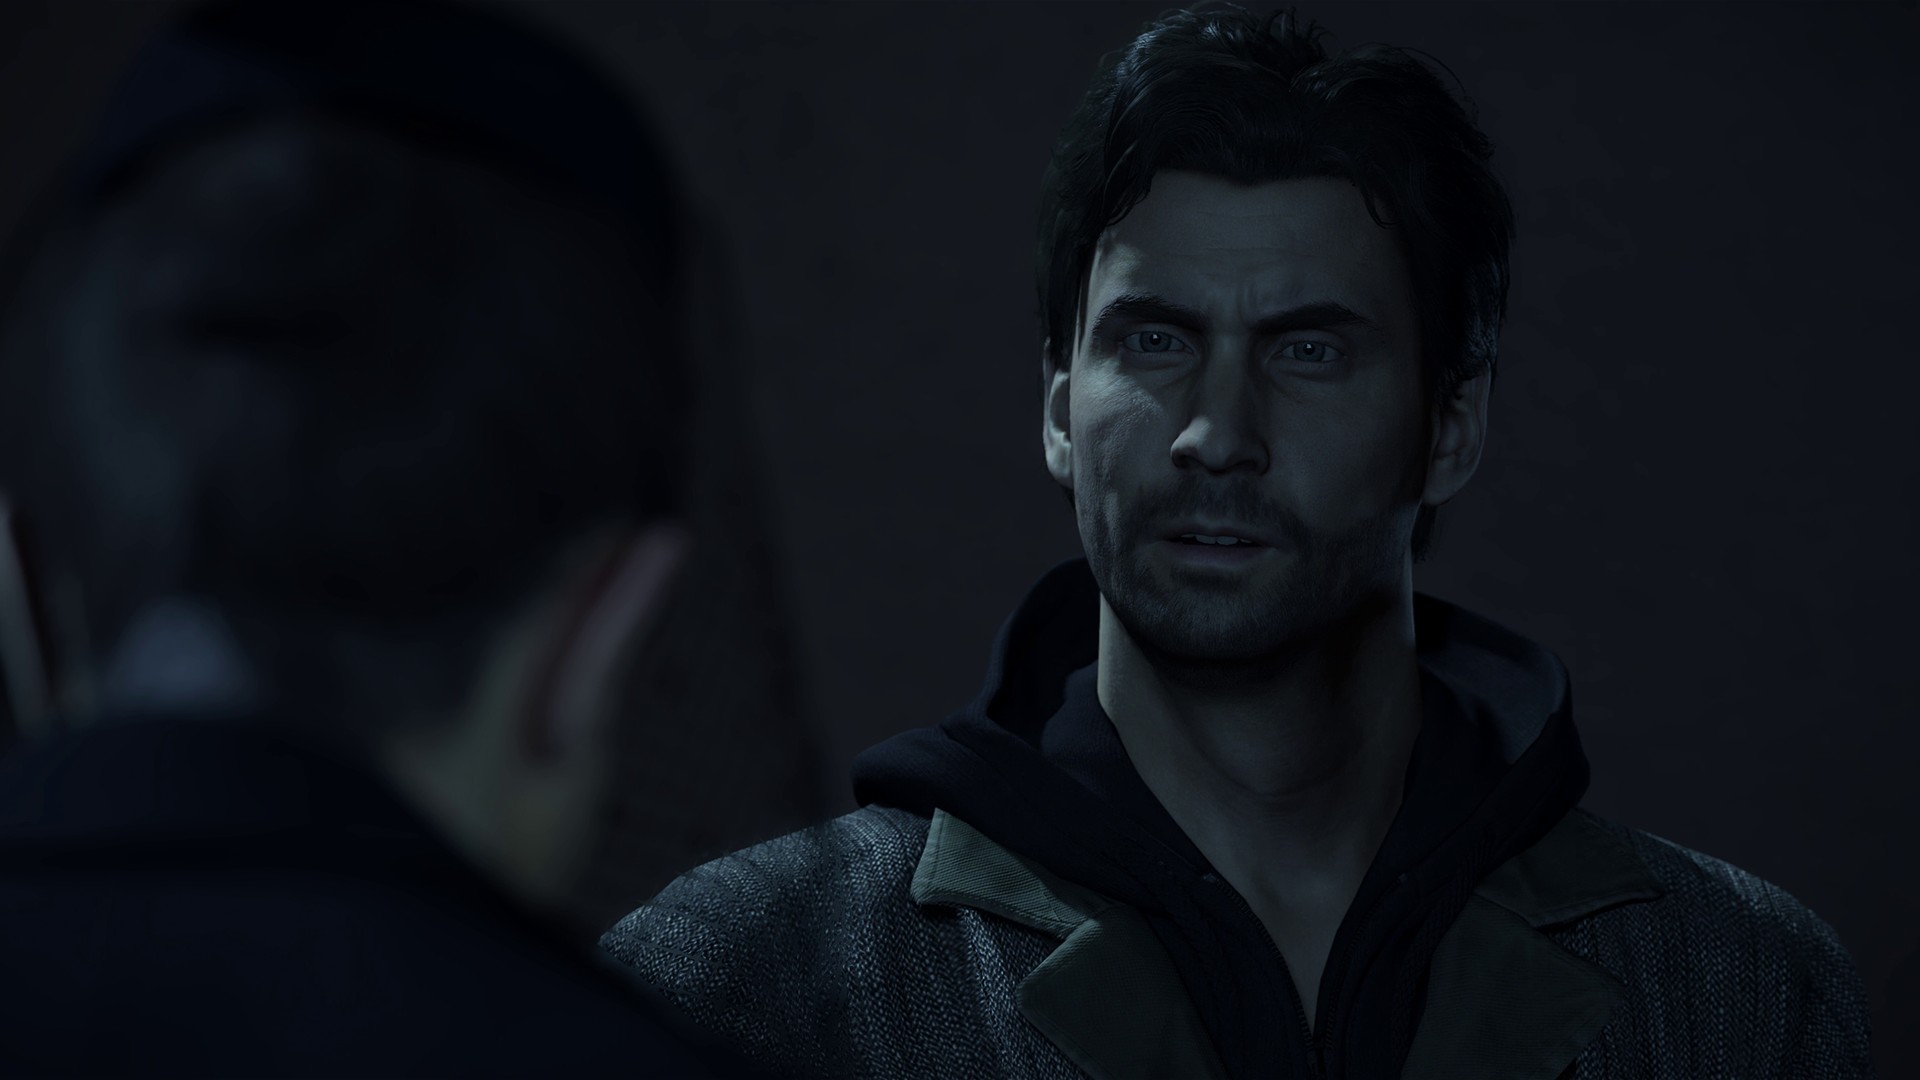 Alan Wake 2: Exclusive Hands-On Preview 